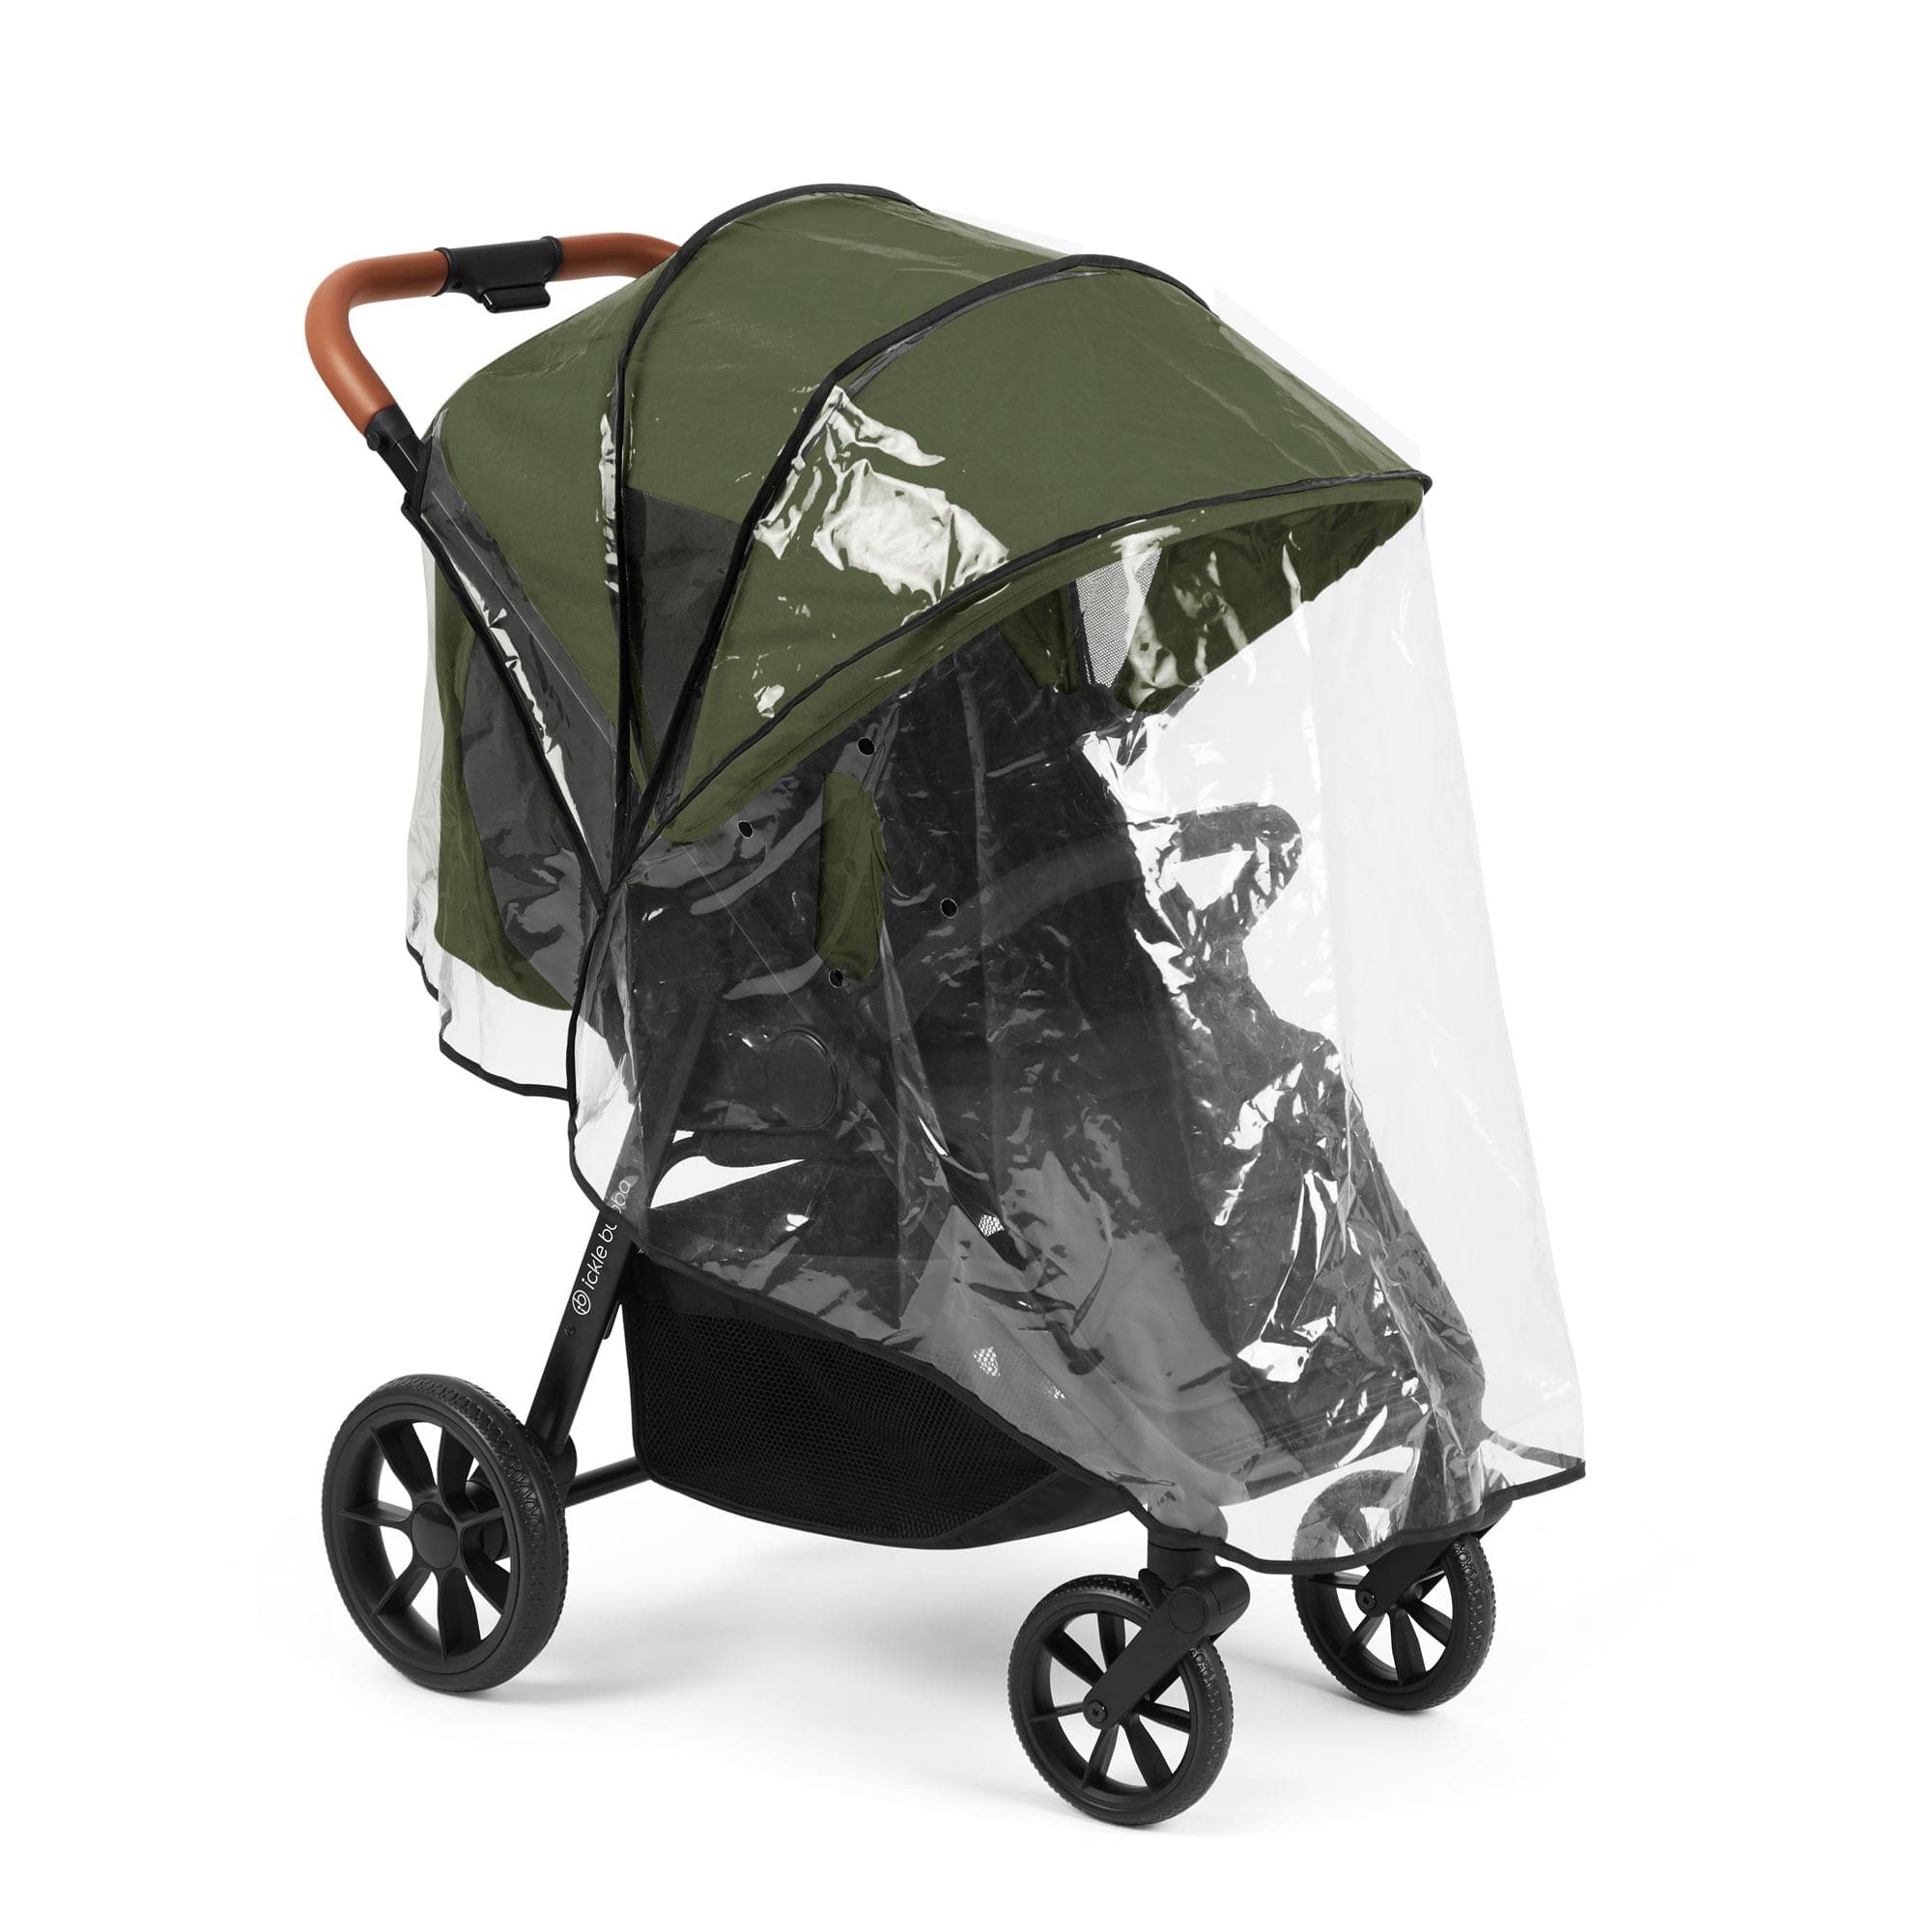 STOMP STRIDE MAX STROLLER in Woodland Pushchairs & Buggies 15-006-200-066 5056515033908